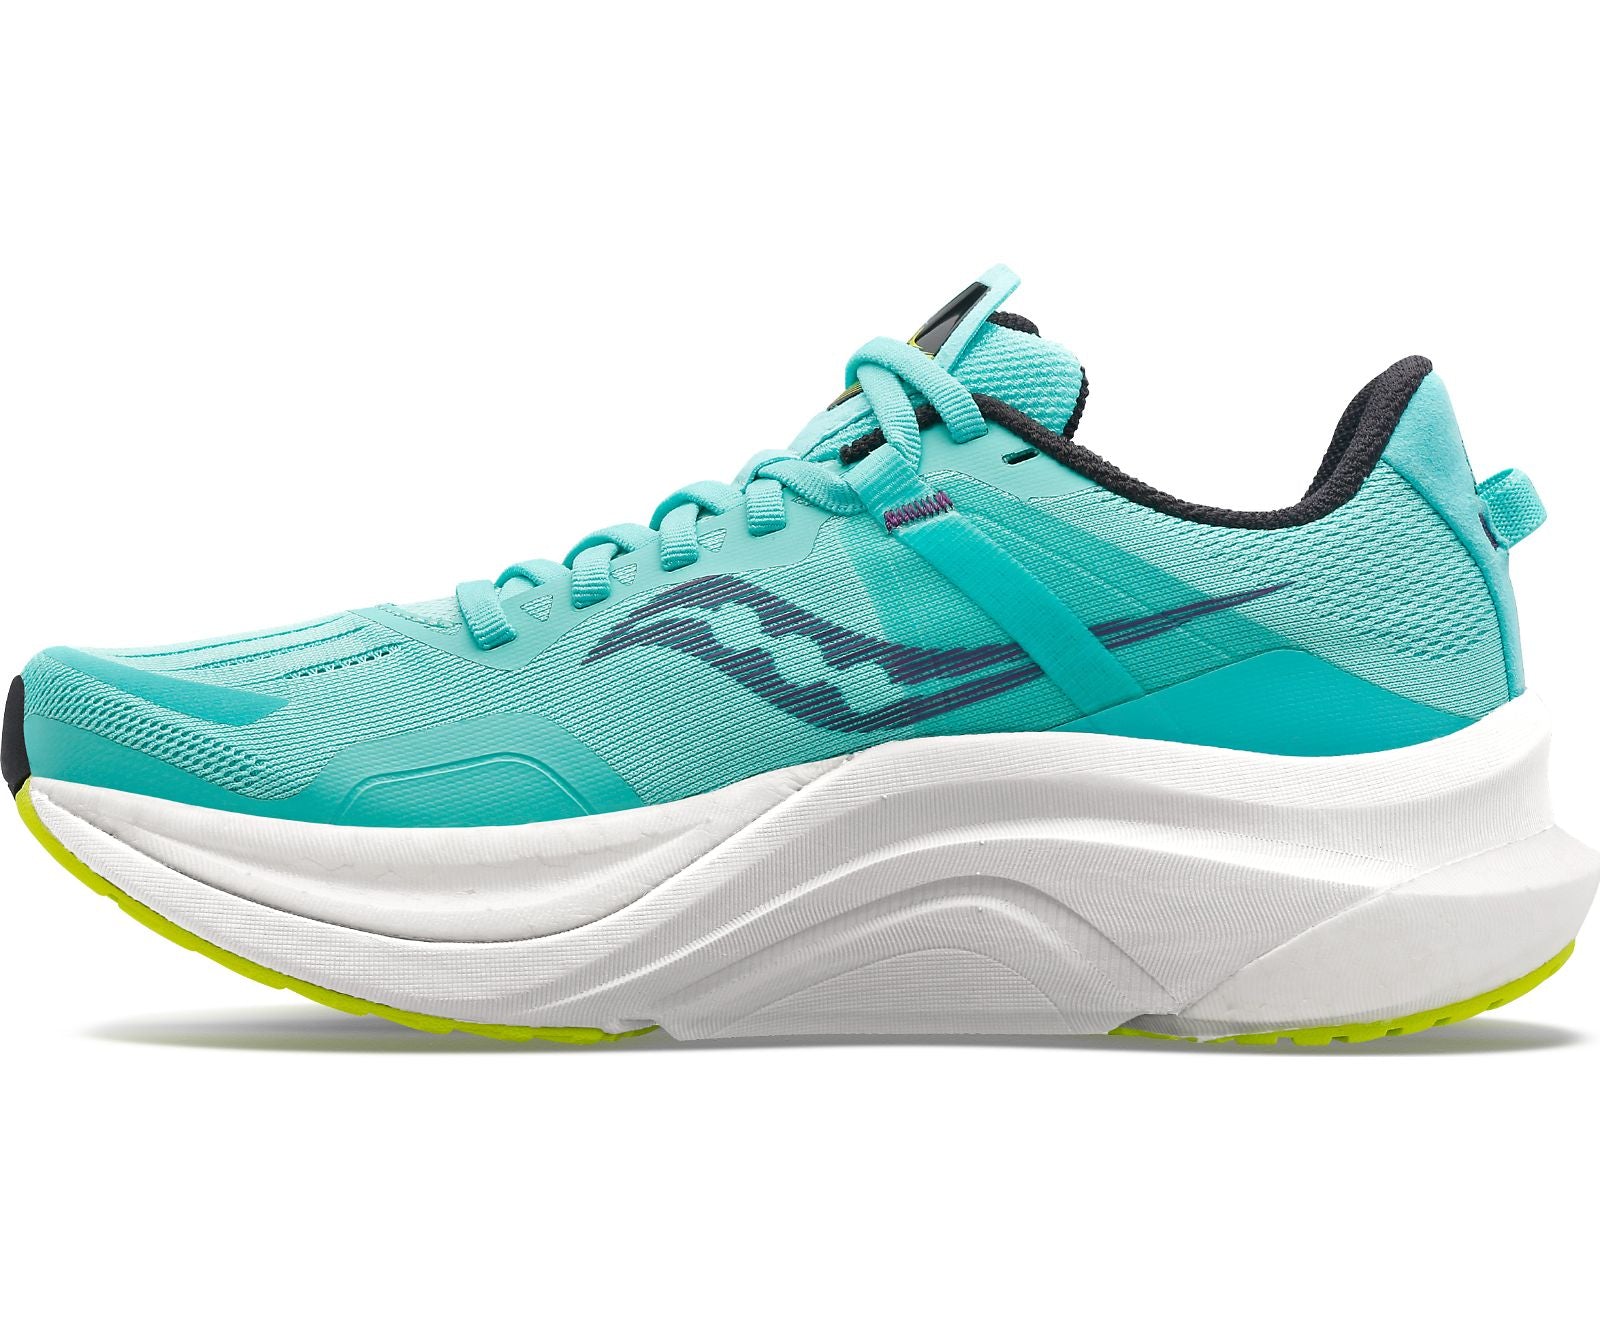 Medial view of the Women's Tempus by Saucony in the color Cool Mint/Acid